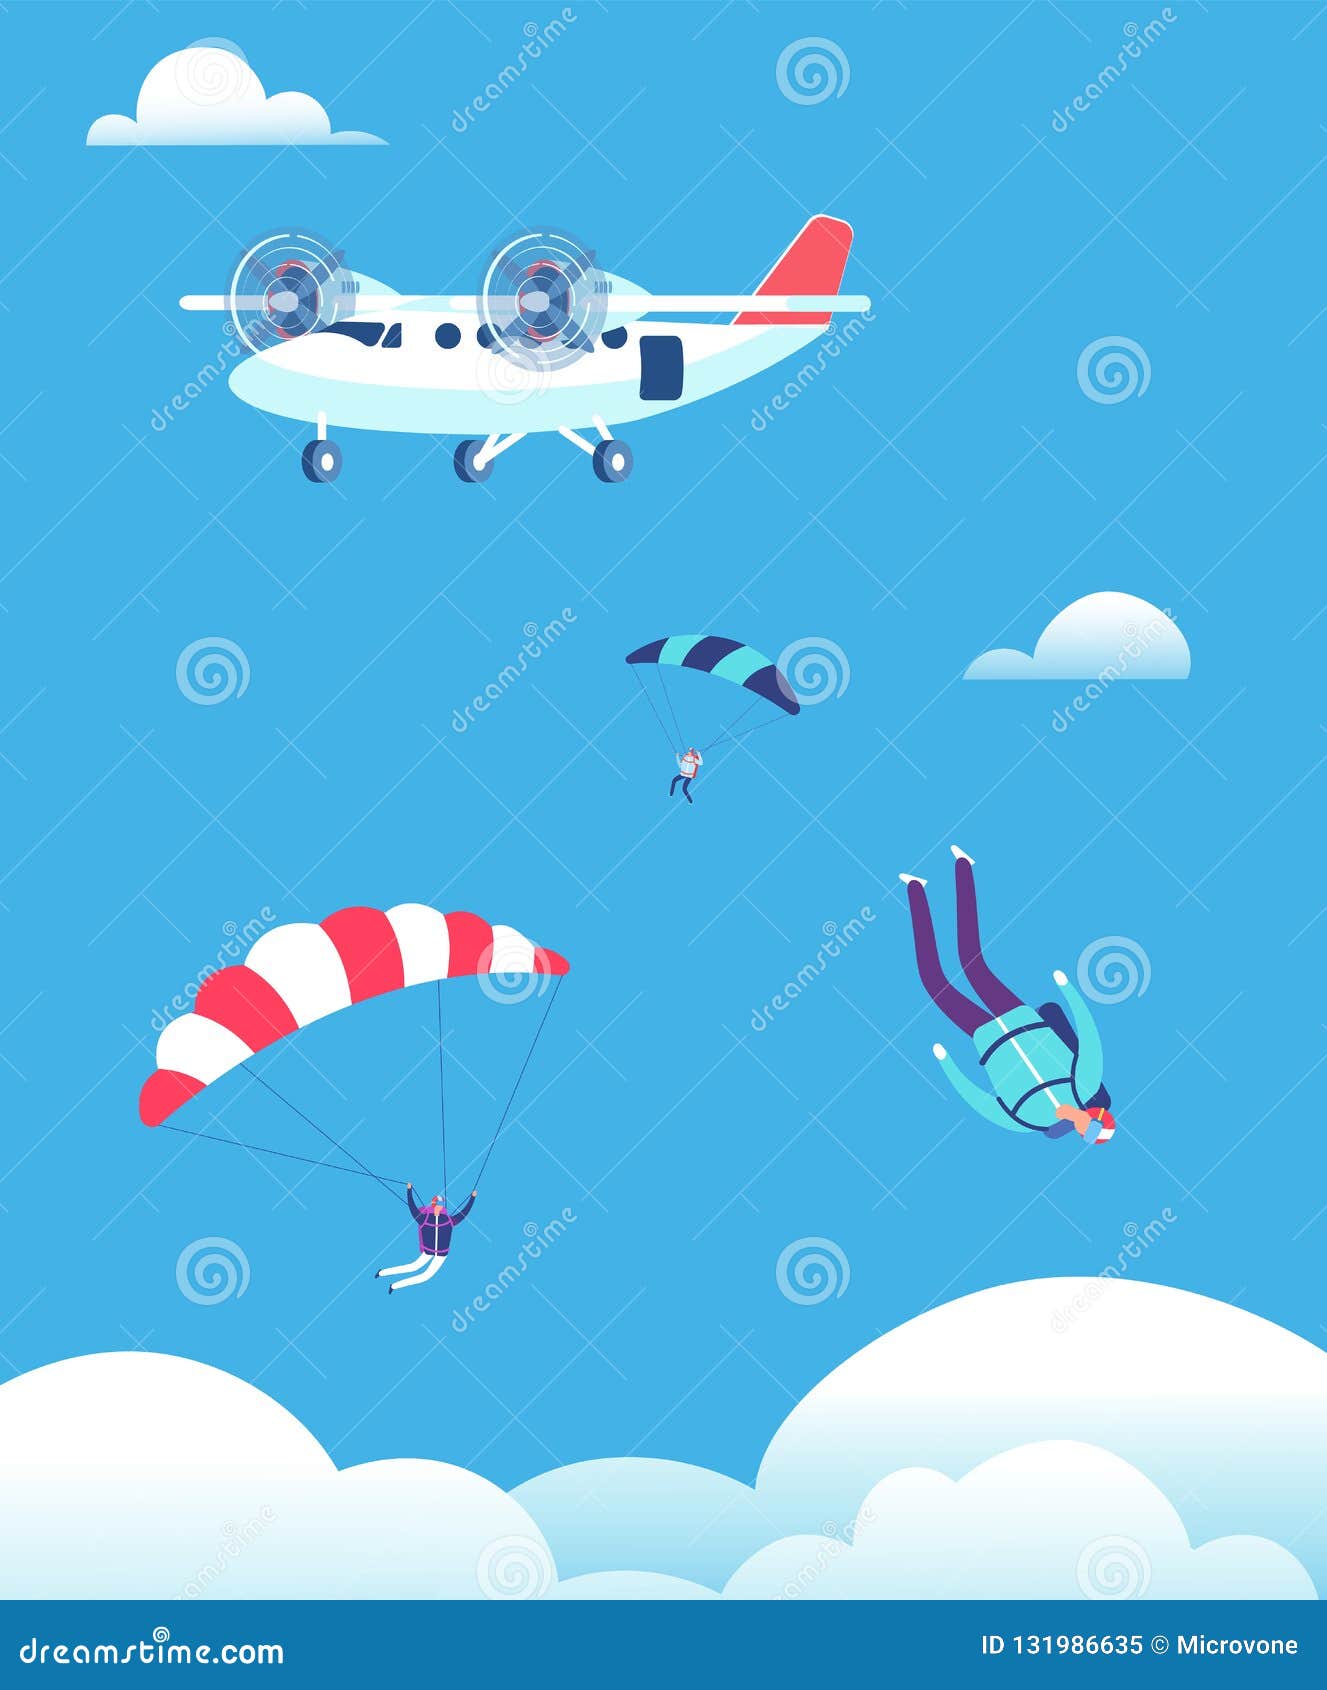 skydiving concept. parachutists jumping out of plane in blue sky. people skydivers  